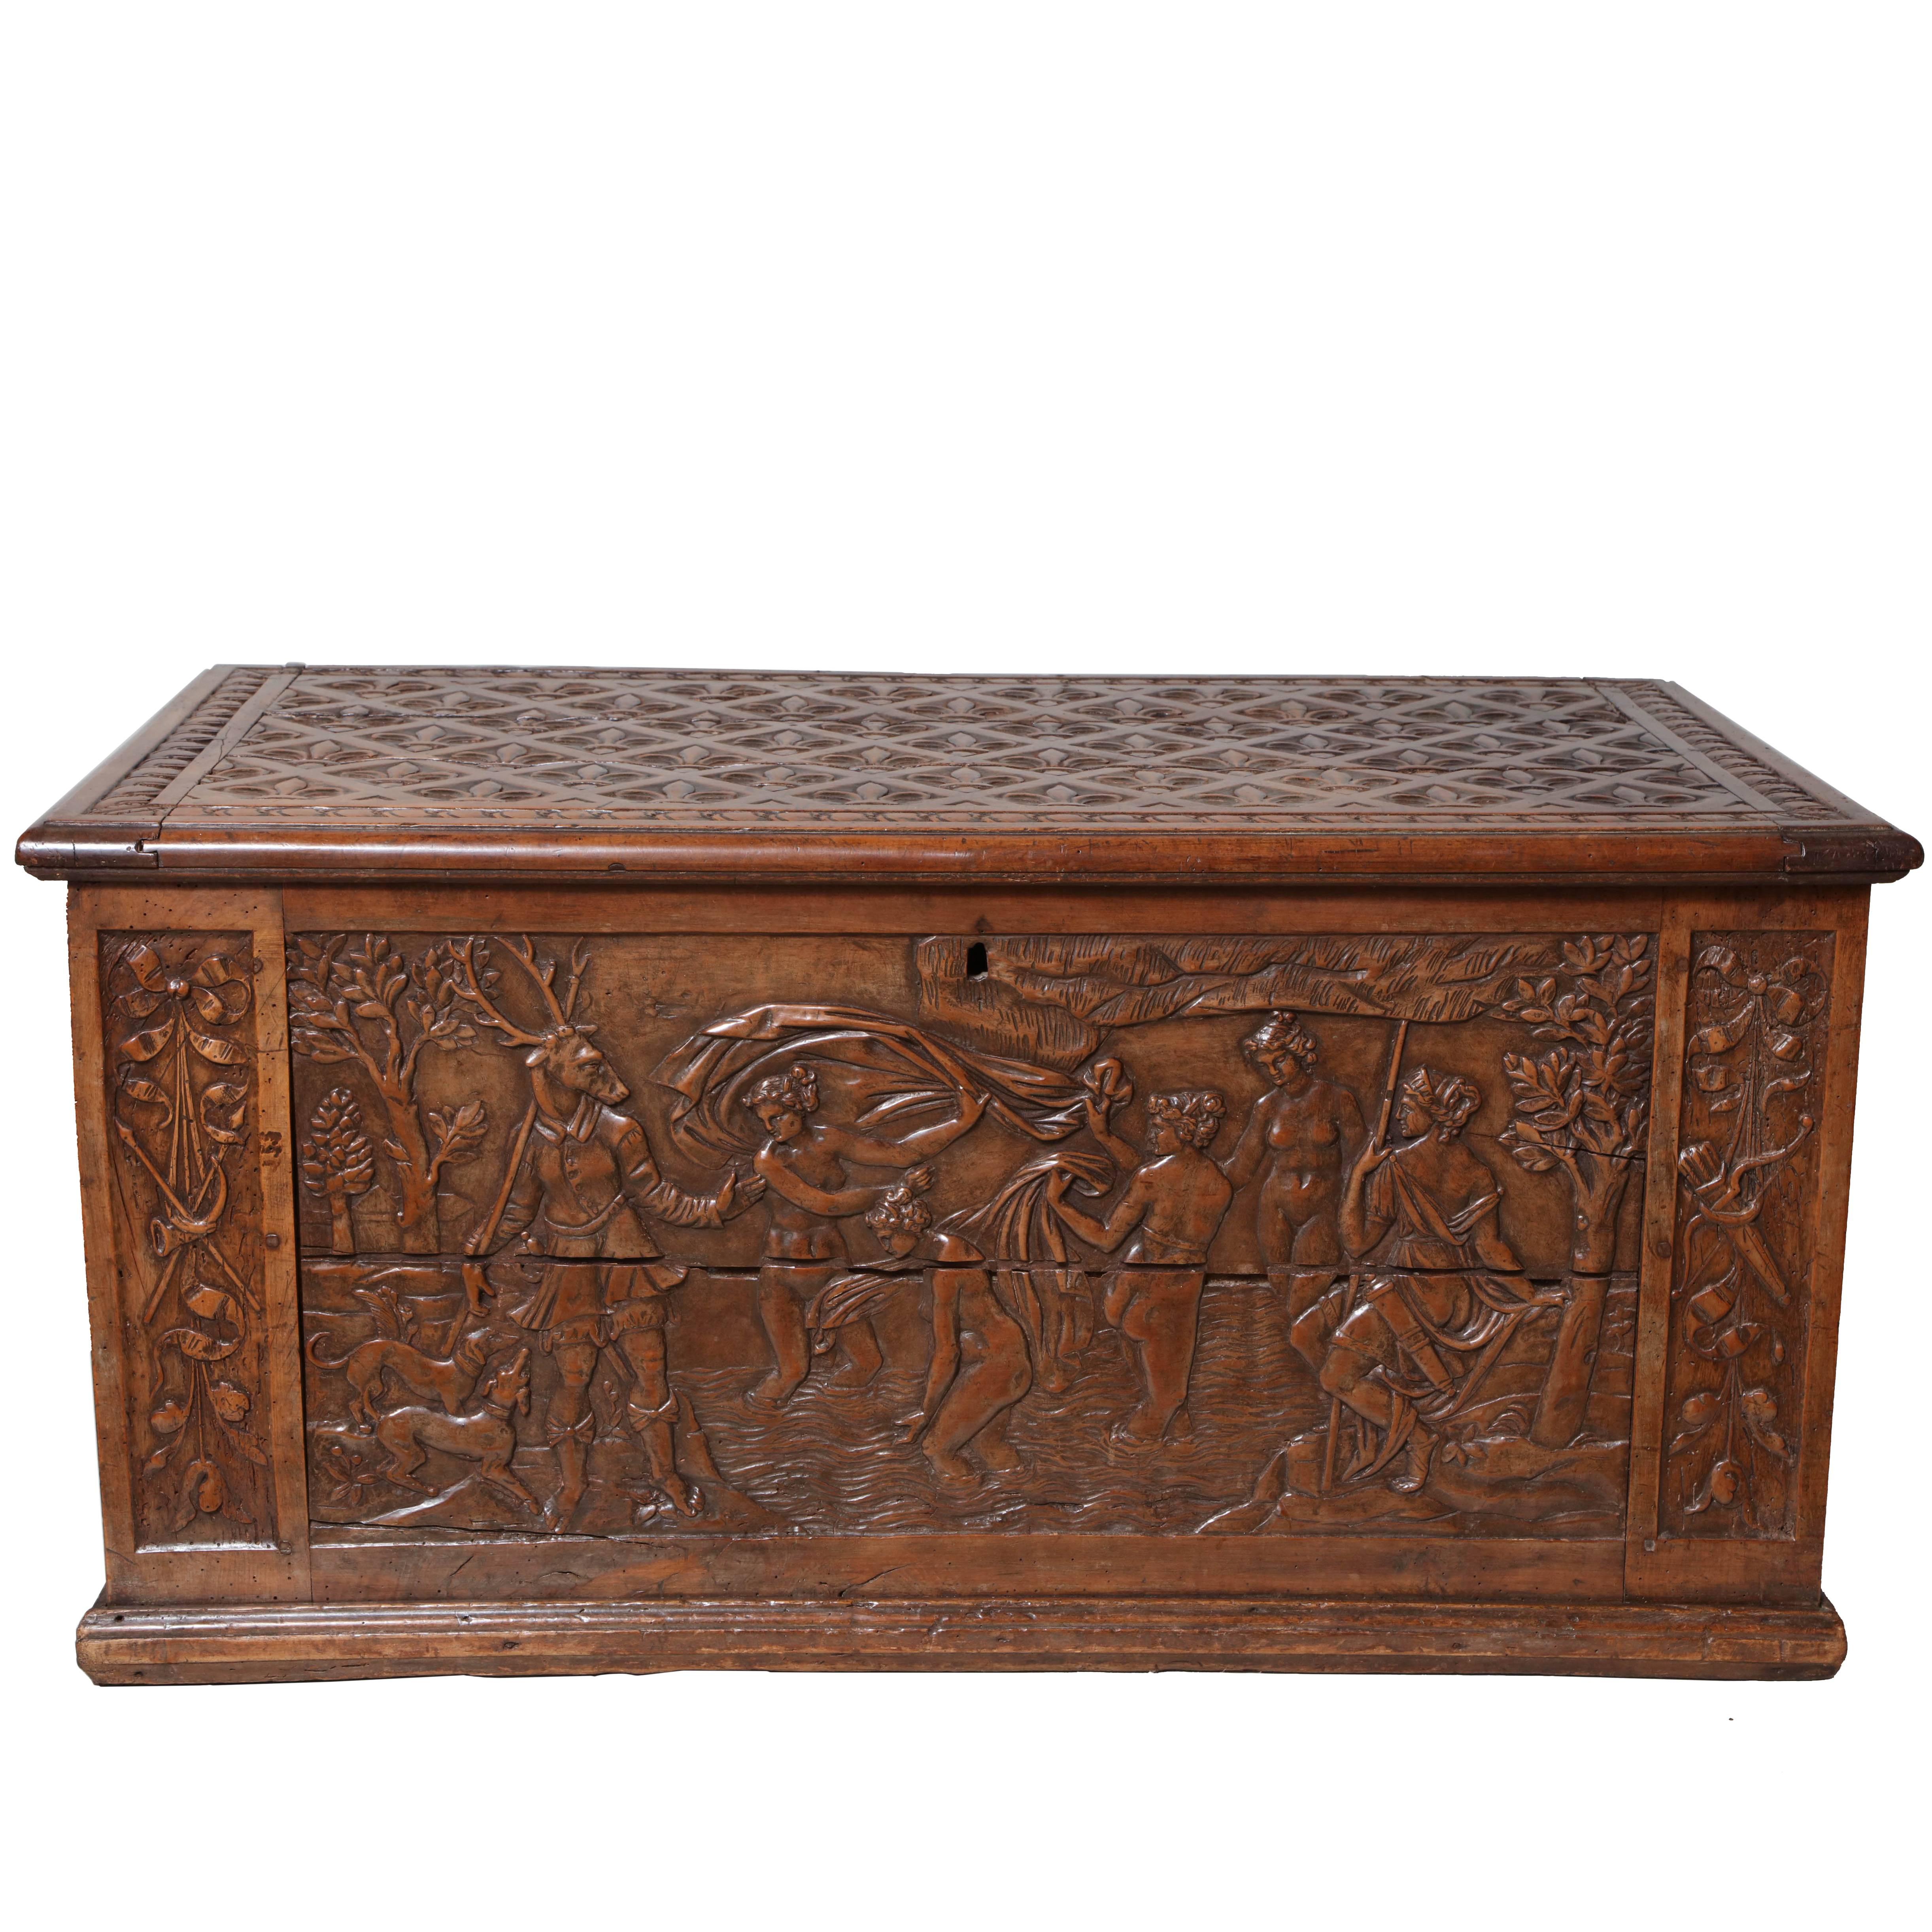 16th Century Pearwood Coffer Depicting Diana and Actaeon